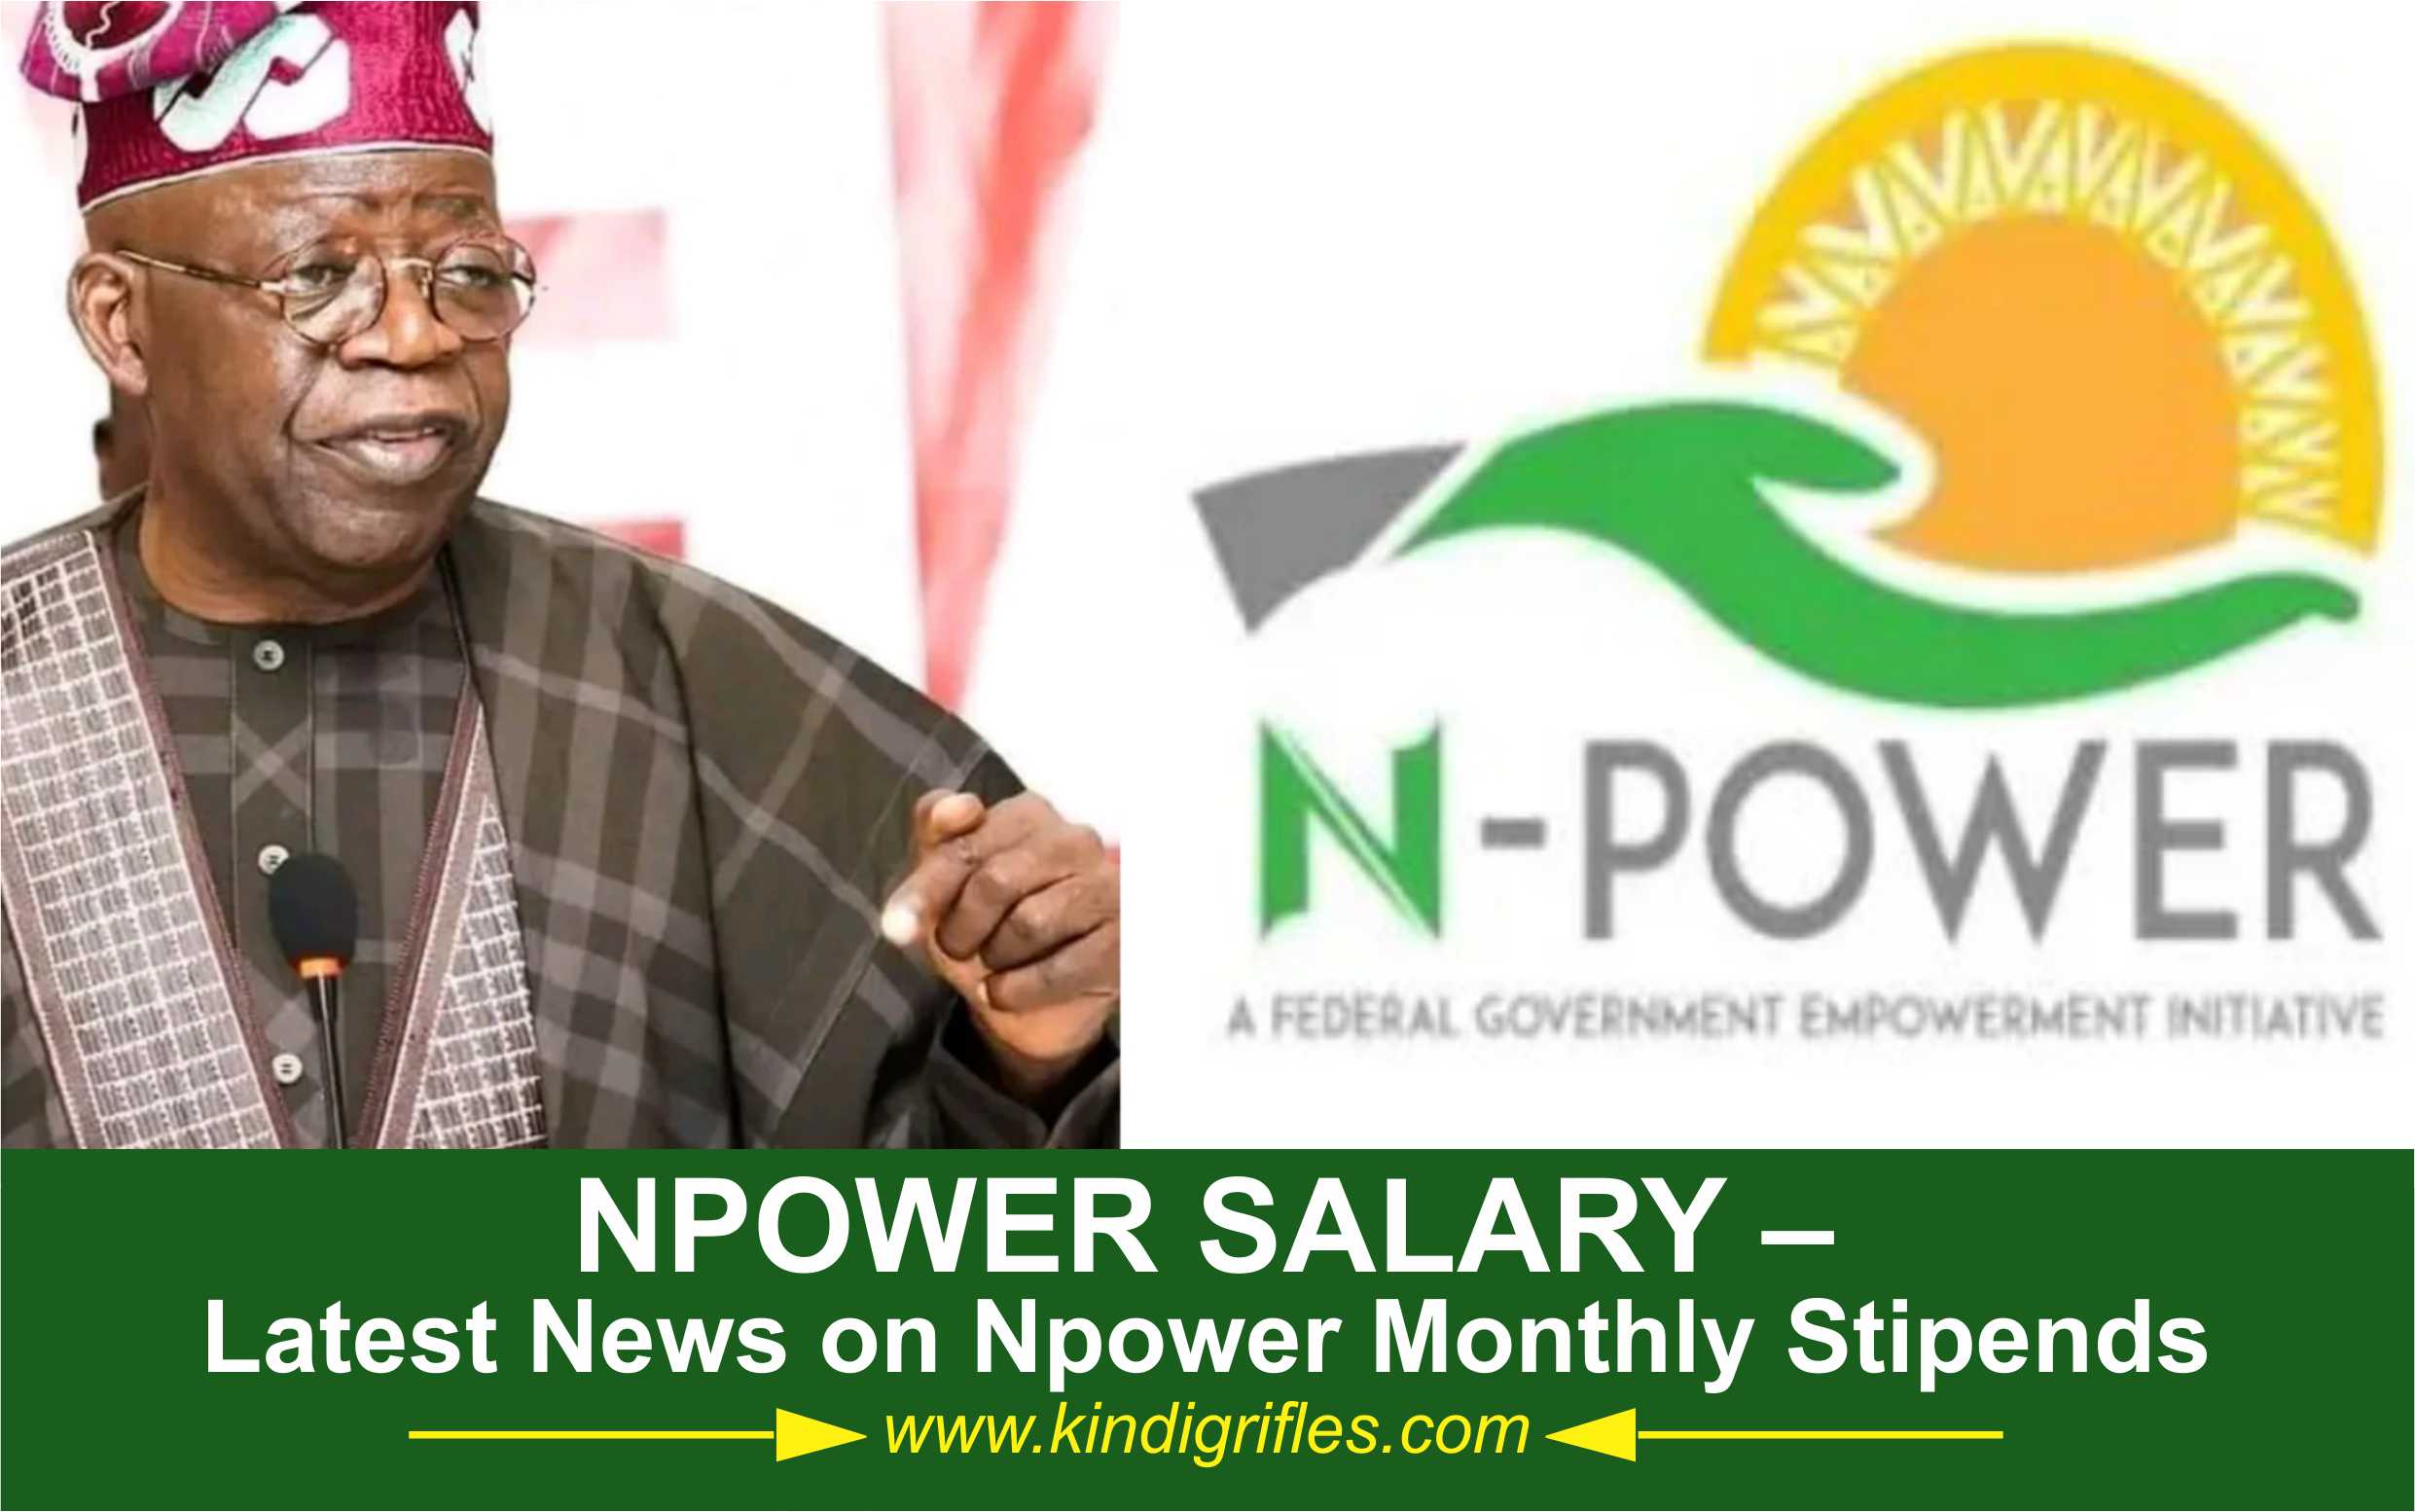 Npower Salary – Latest News on Npower Monthly Stipends